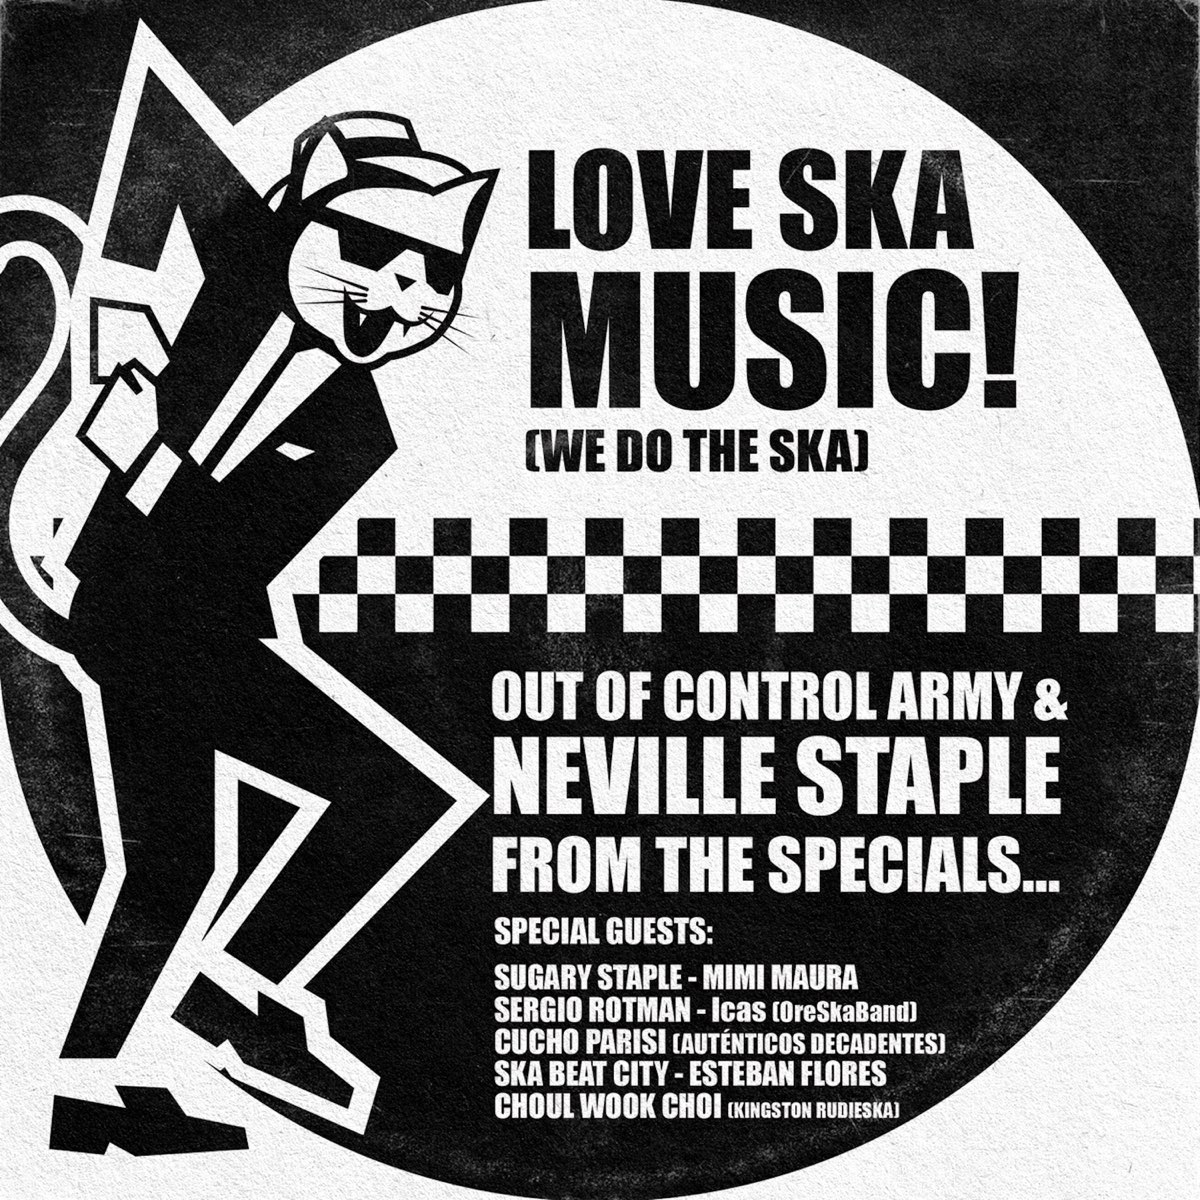 We Do The Ska (feat. Sugary Staple, Sergio Rotman, Cucho Parisi & Ska Beat  City) - Single by Out Of Control Army & Neville Staple on Apple Music